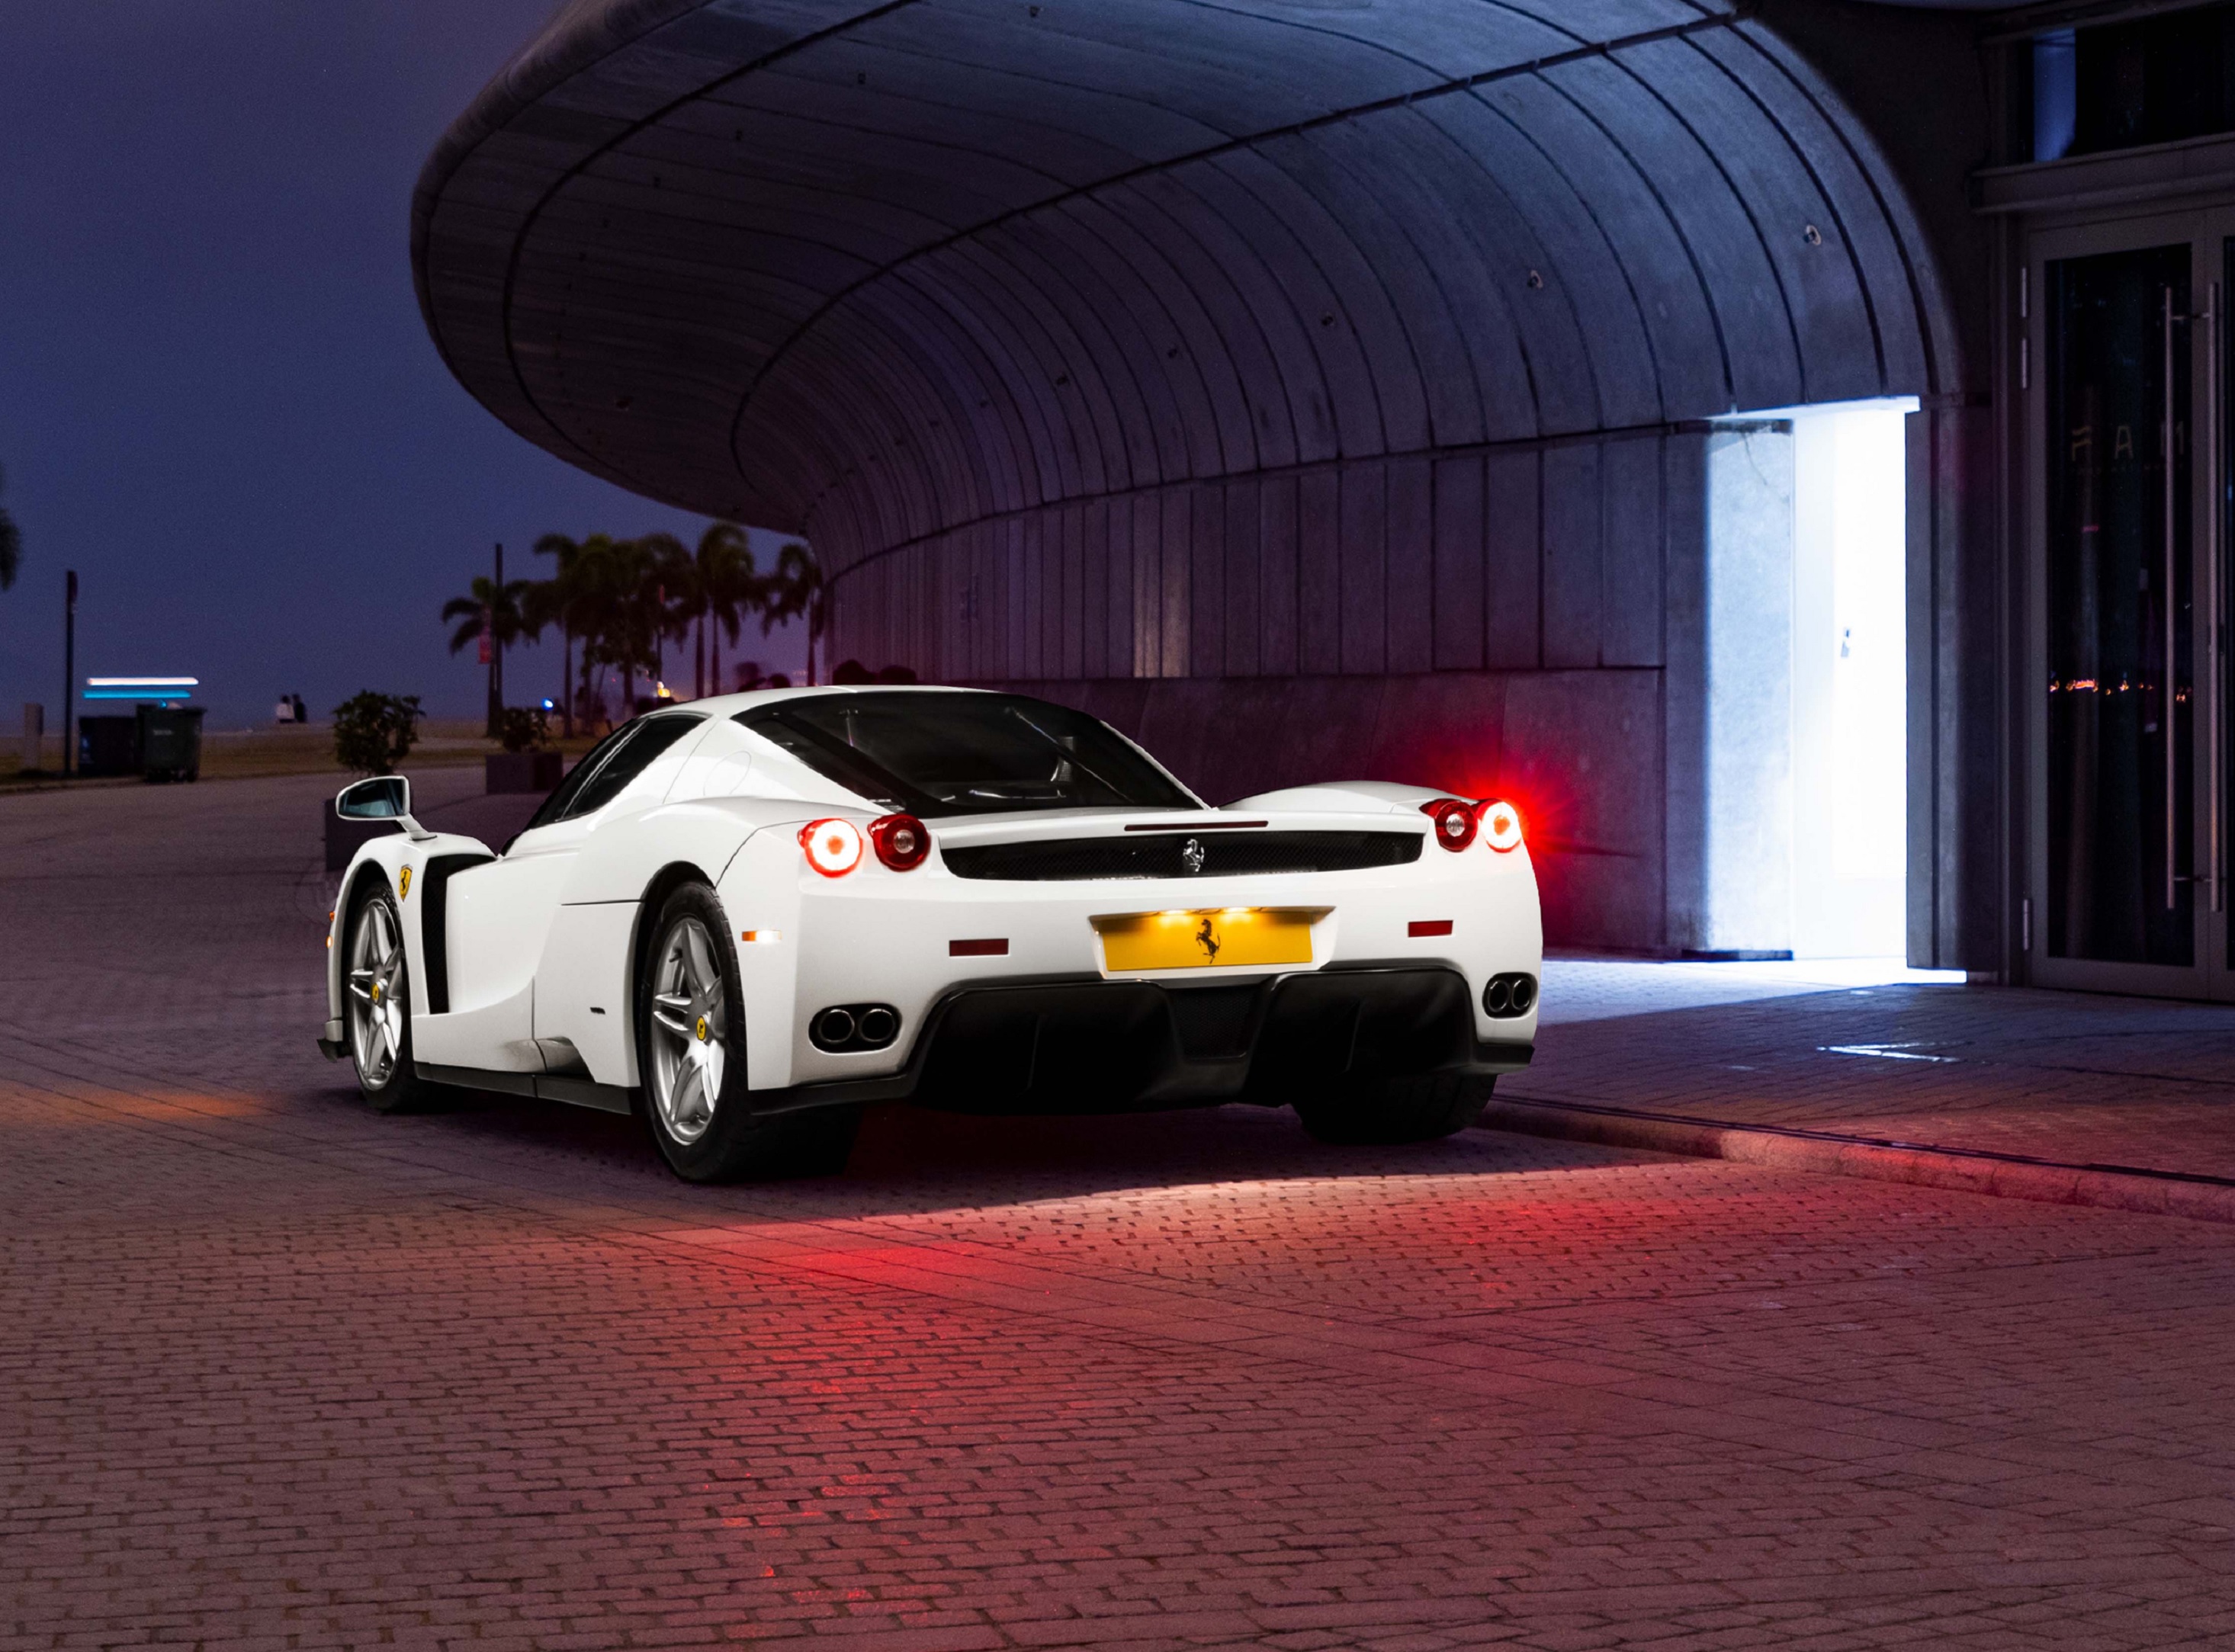 The rear 3/4 view of the 1-of-1 Bianco Avus white 2003 Ferrari Enzo by an illuminated door